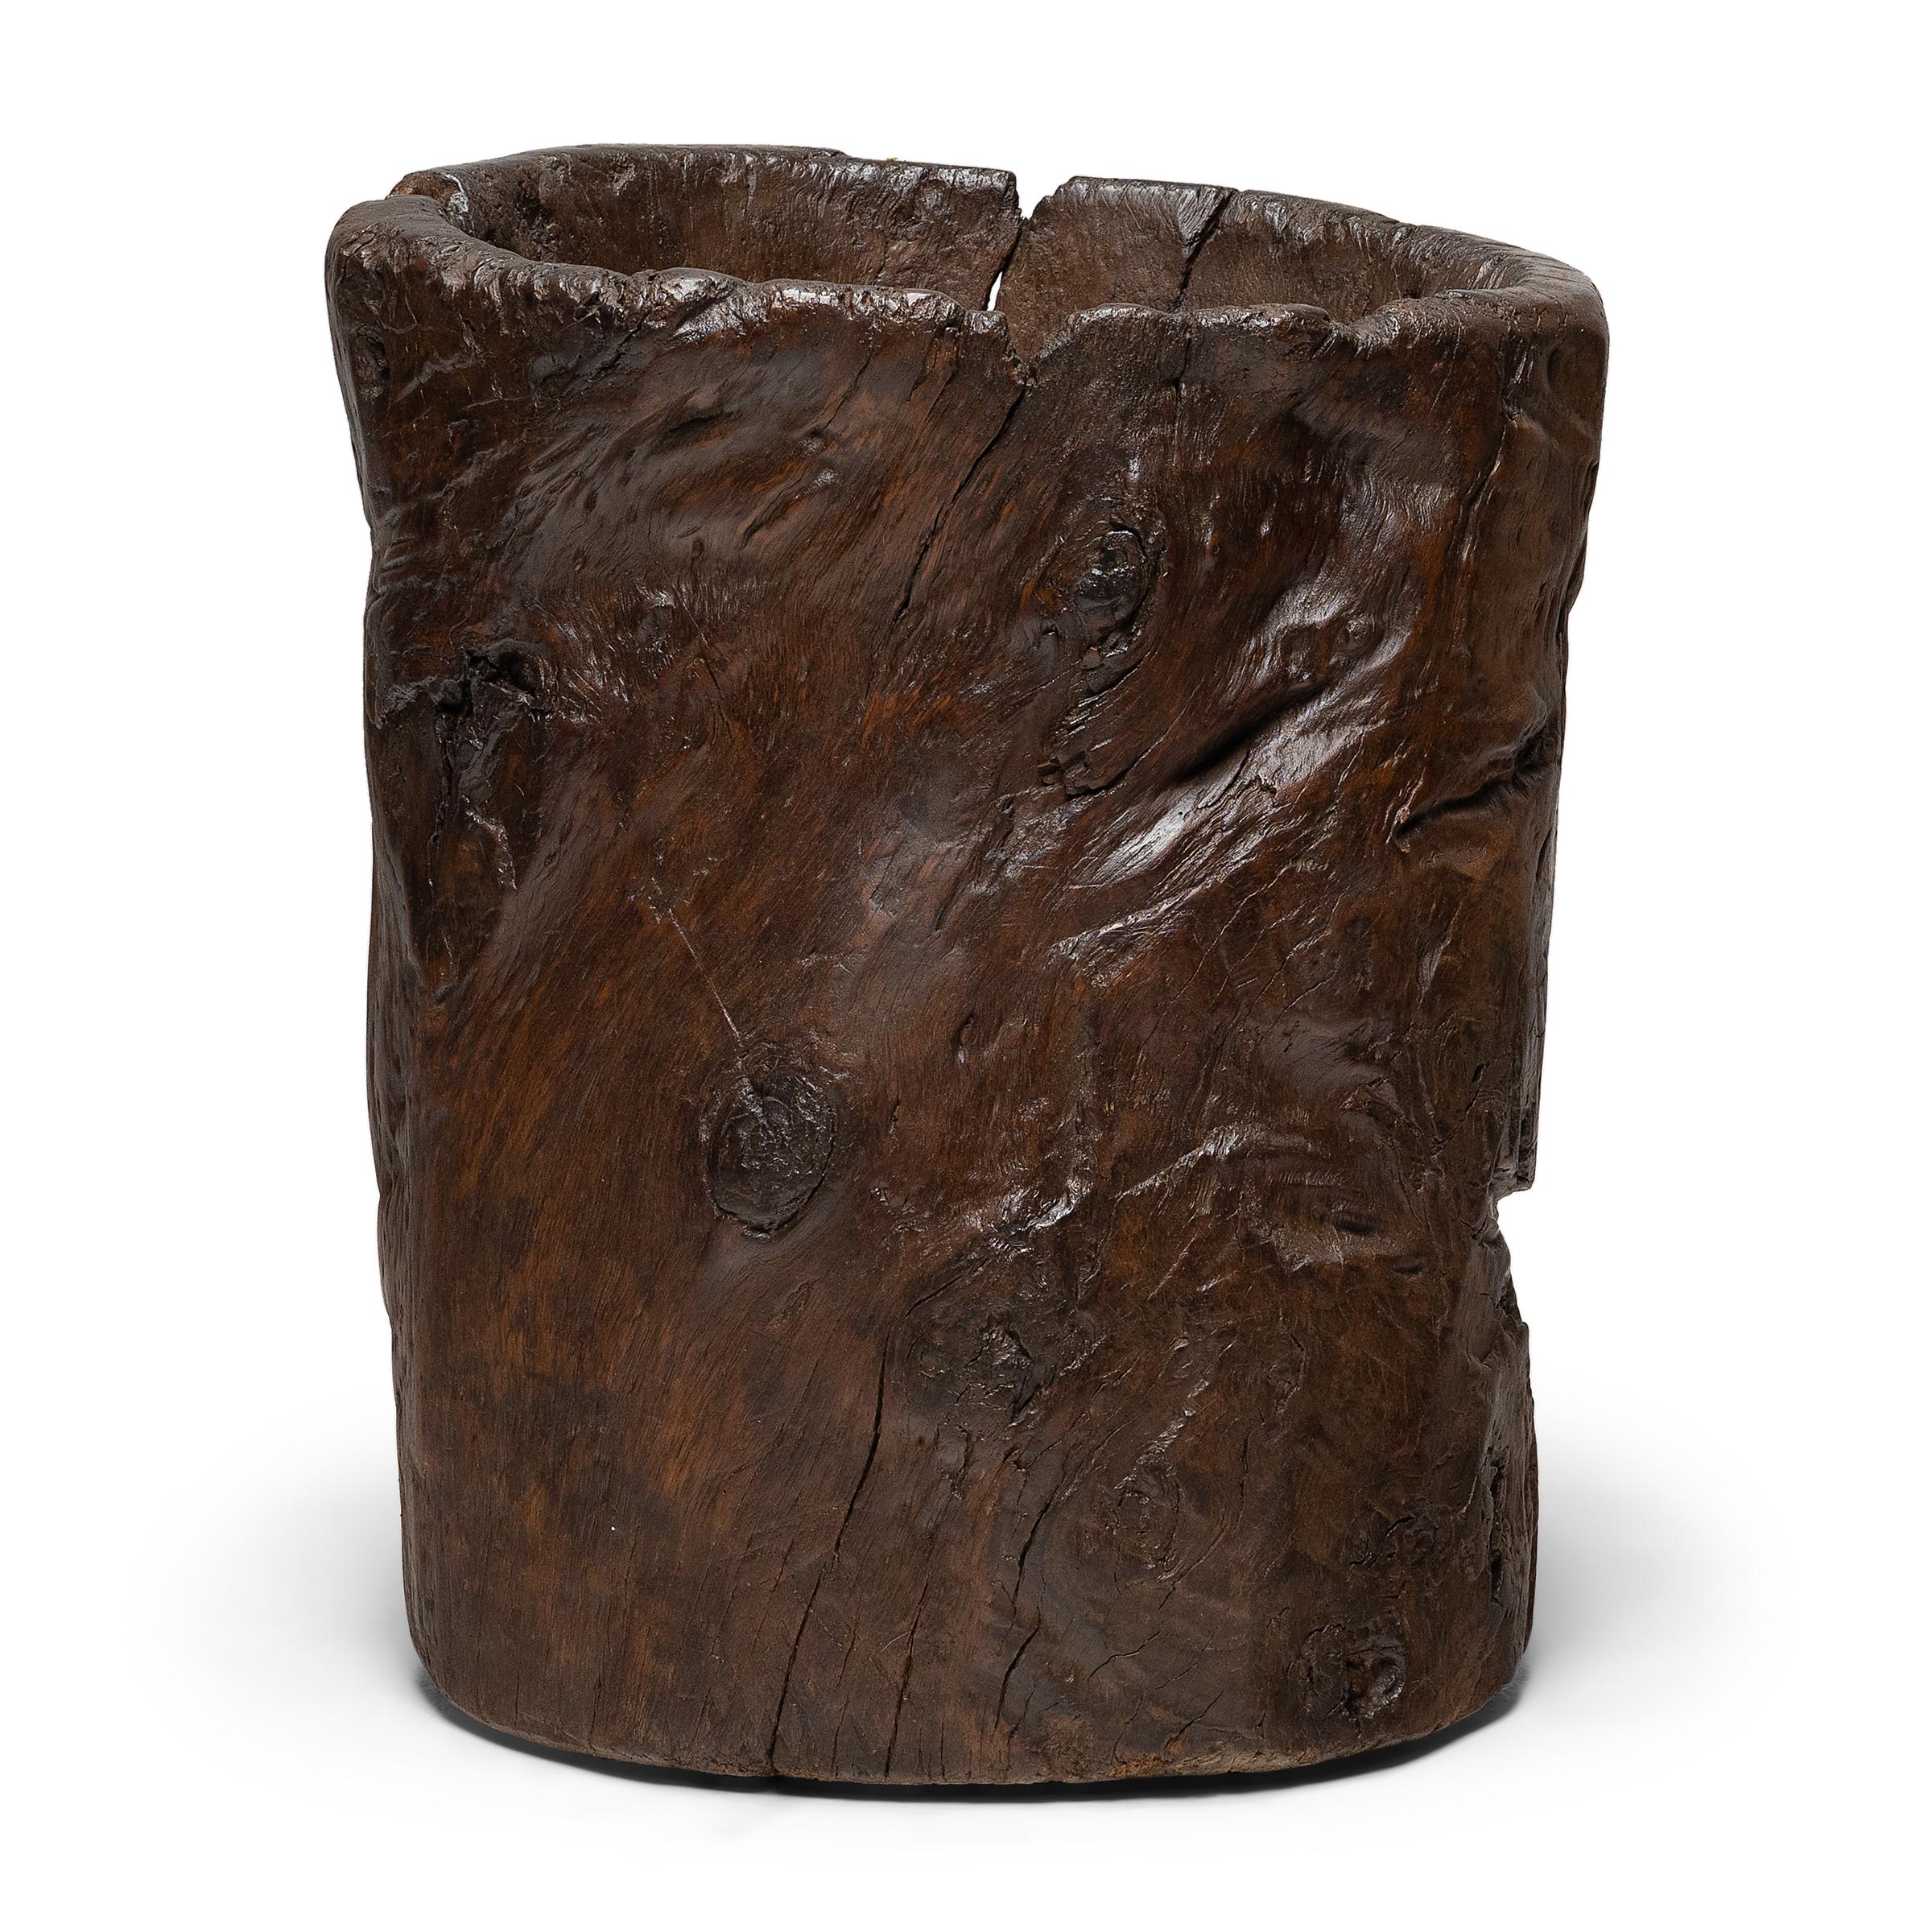 Primitive Chinese Gnarled Trunk Mortar, c. 1850